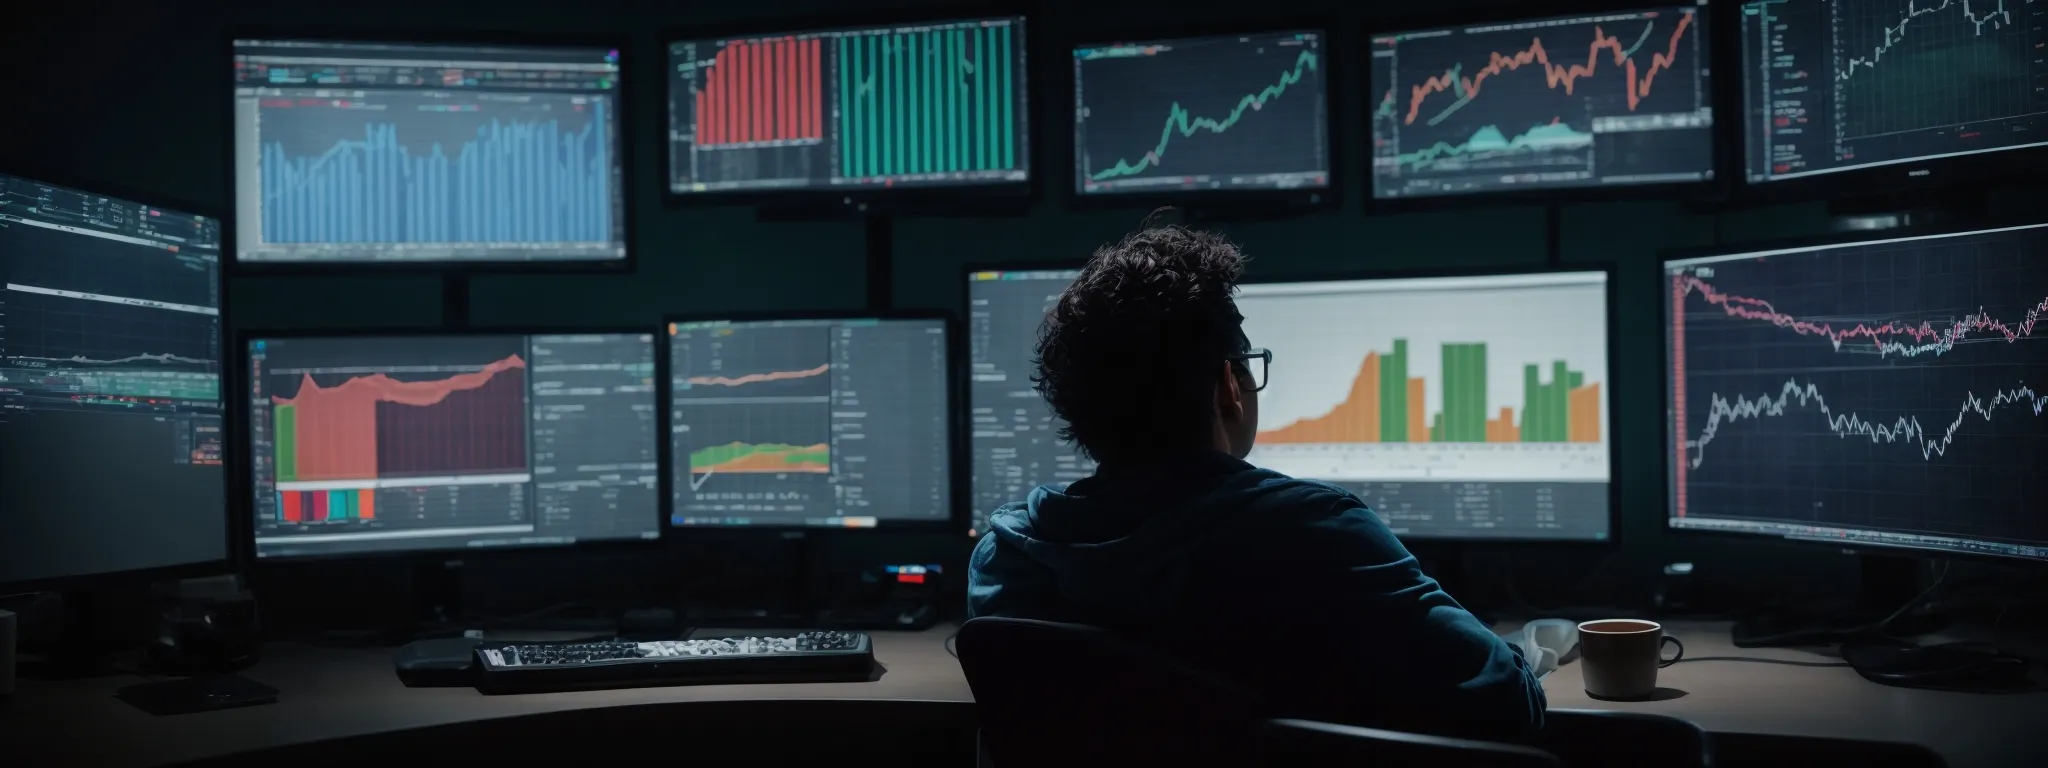 a person sits before a large computer monitor, absorbed in analyzing colorful graphs and charts of seo analytics.